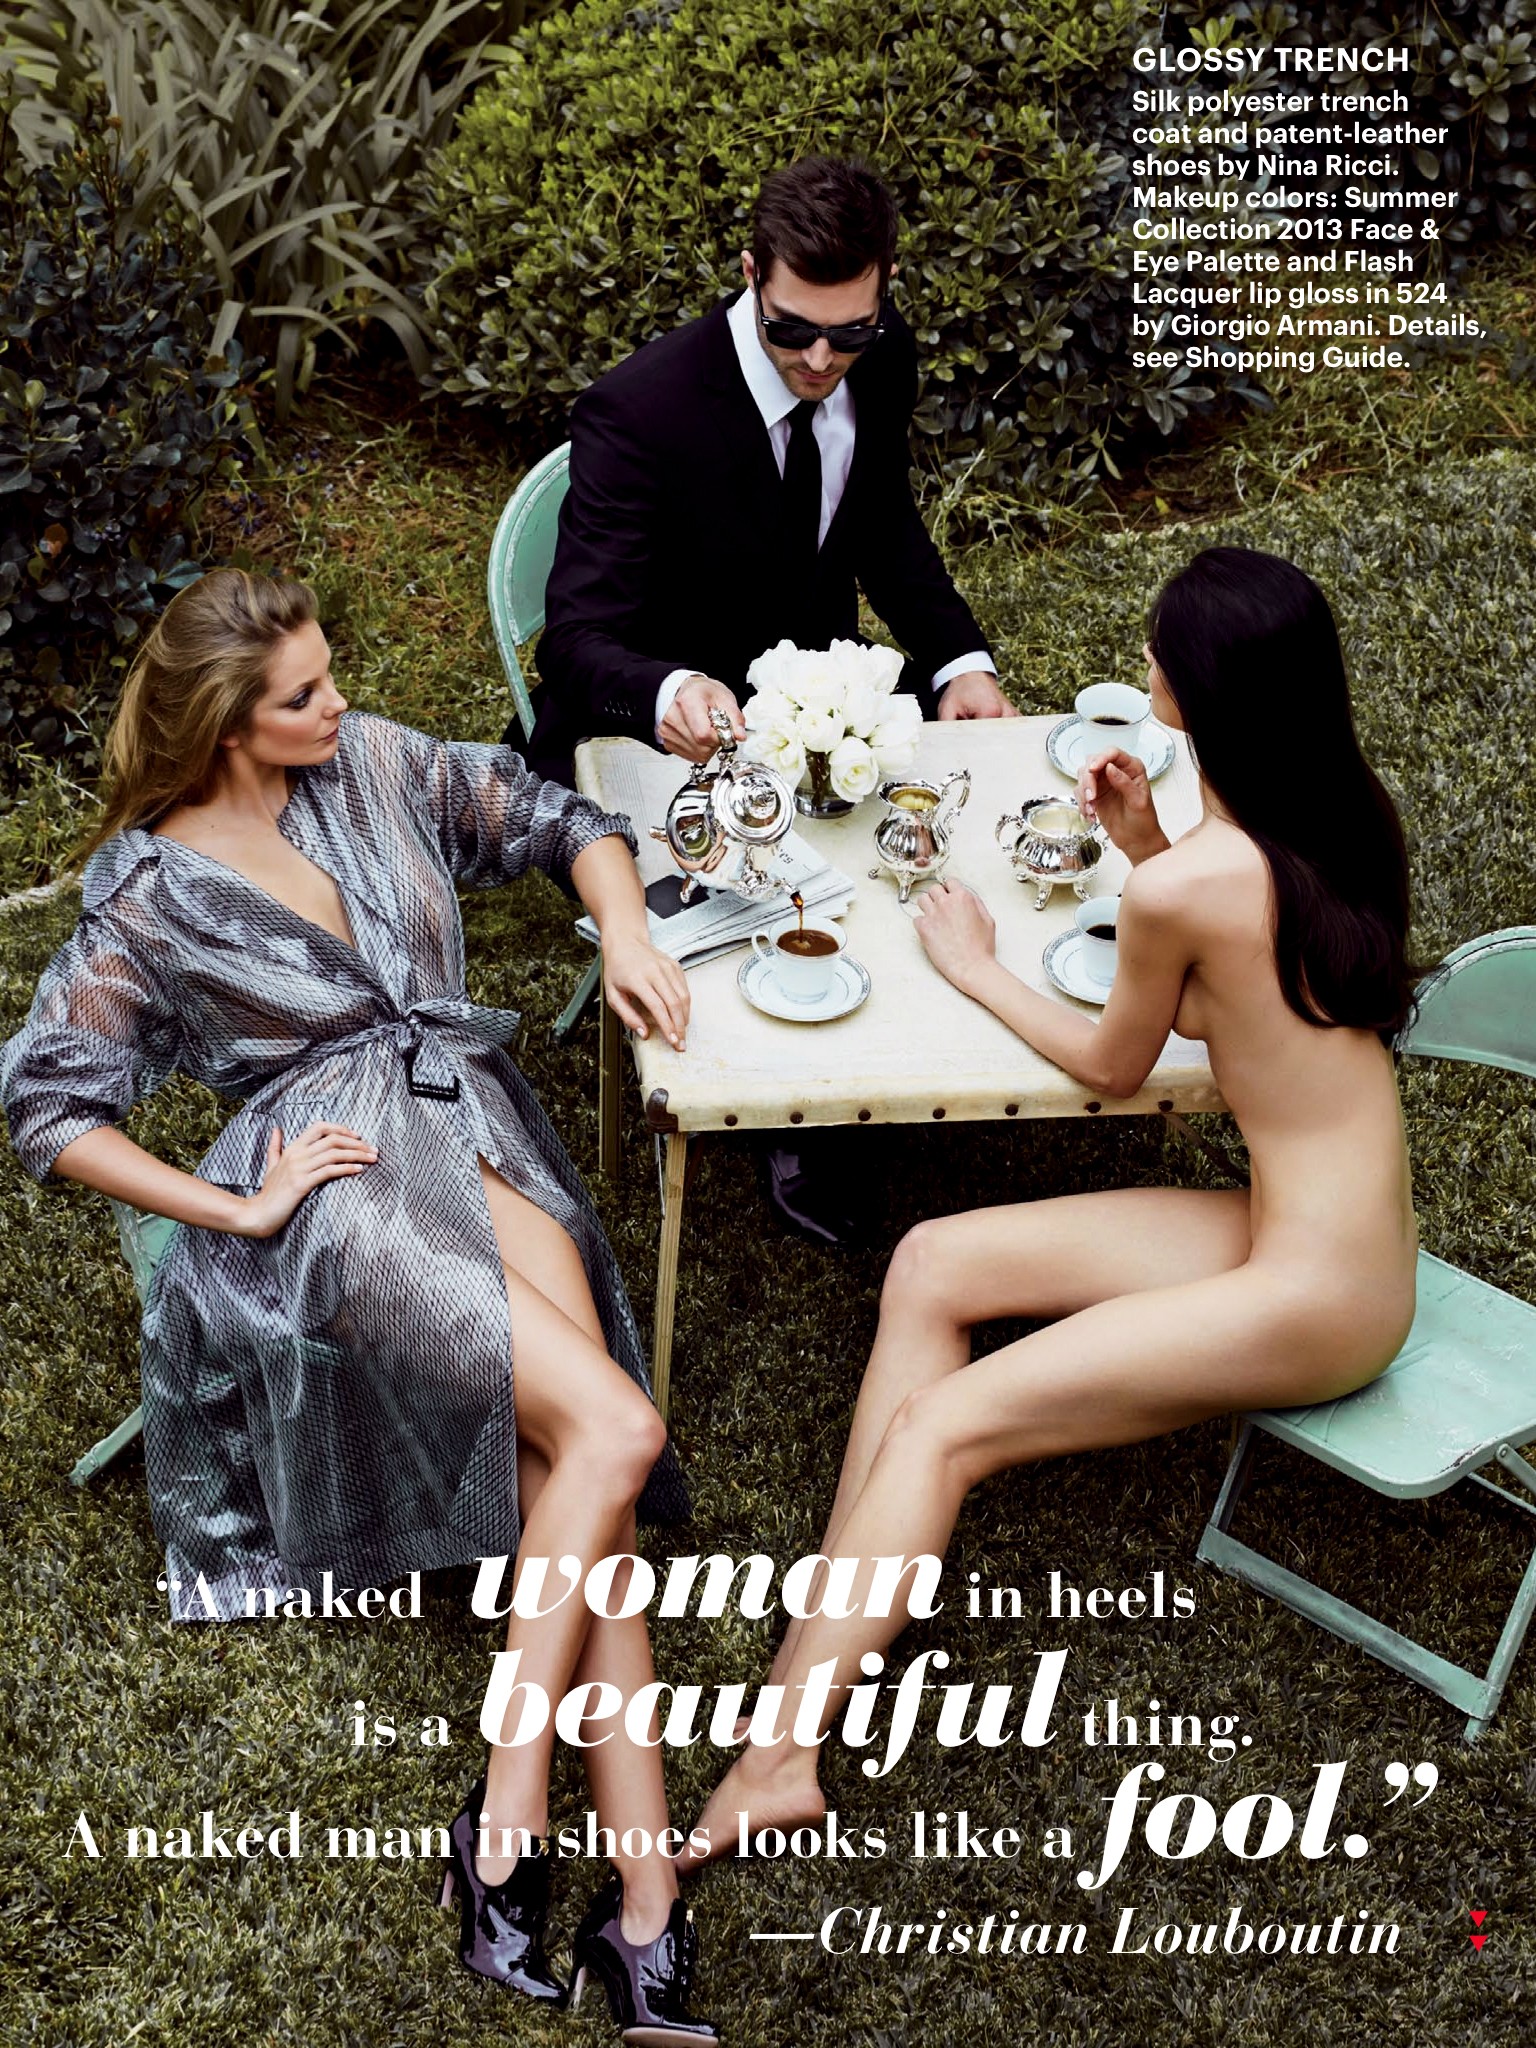 fashion_scans_remastered-patrick_demarchelier-allure_usa_ipad-may_2013-scanned_by_vampirehorde-hq-14.jpg